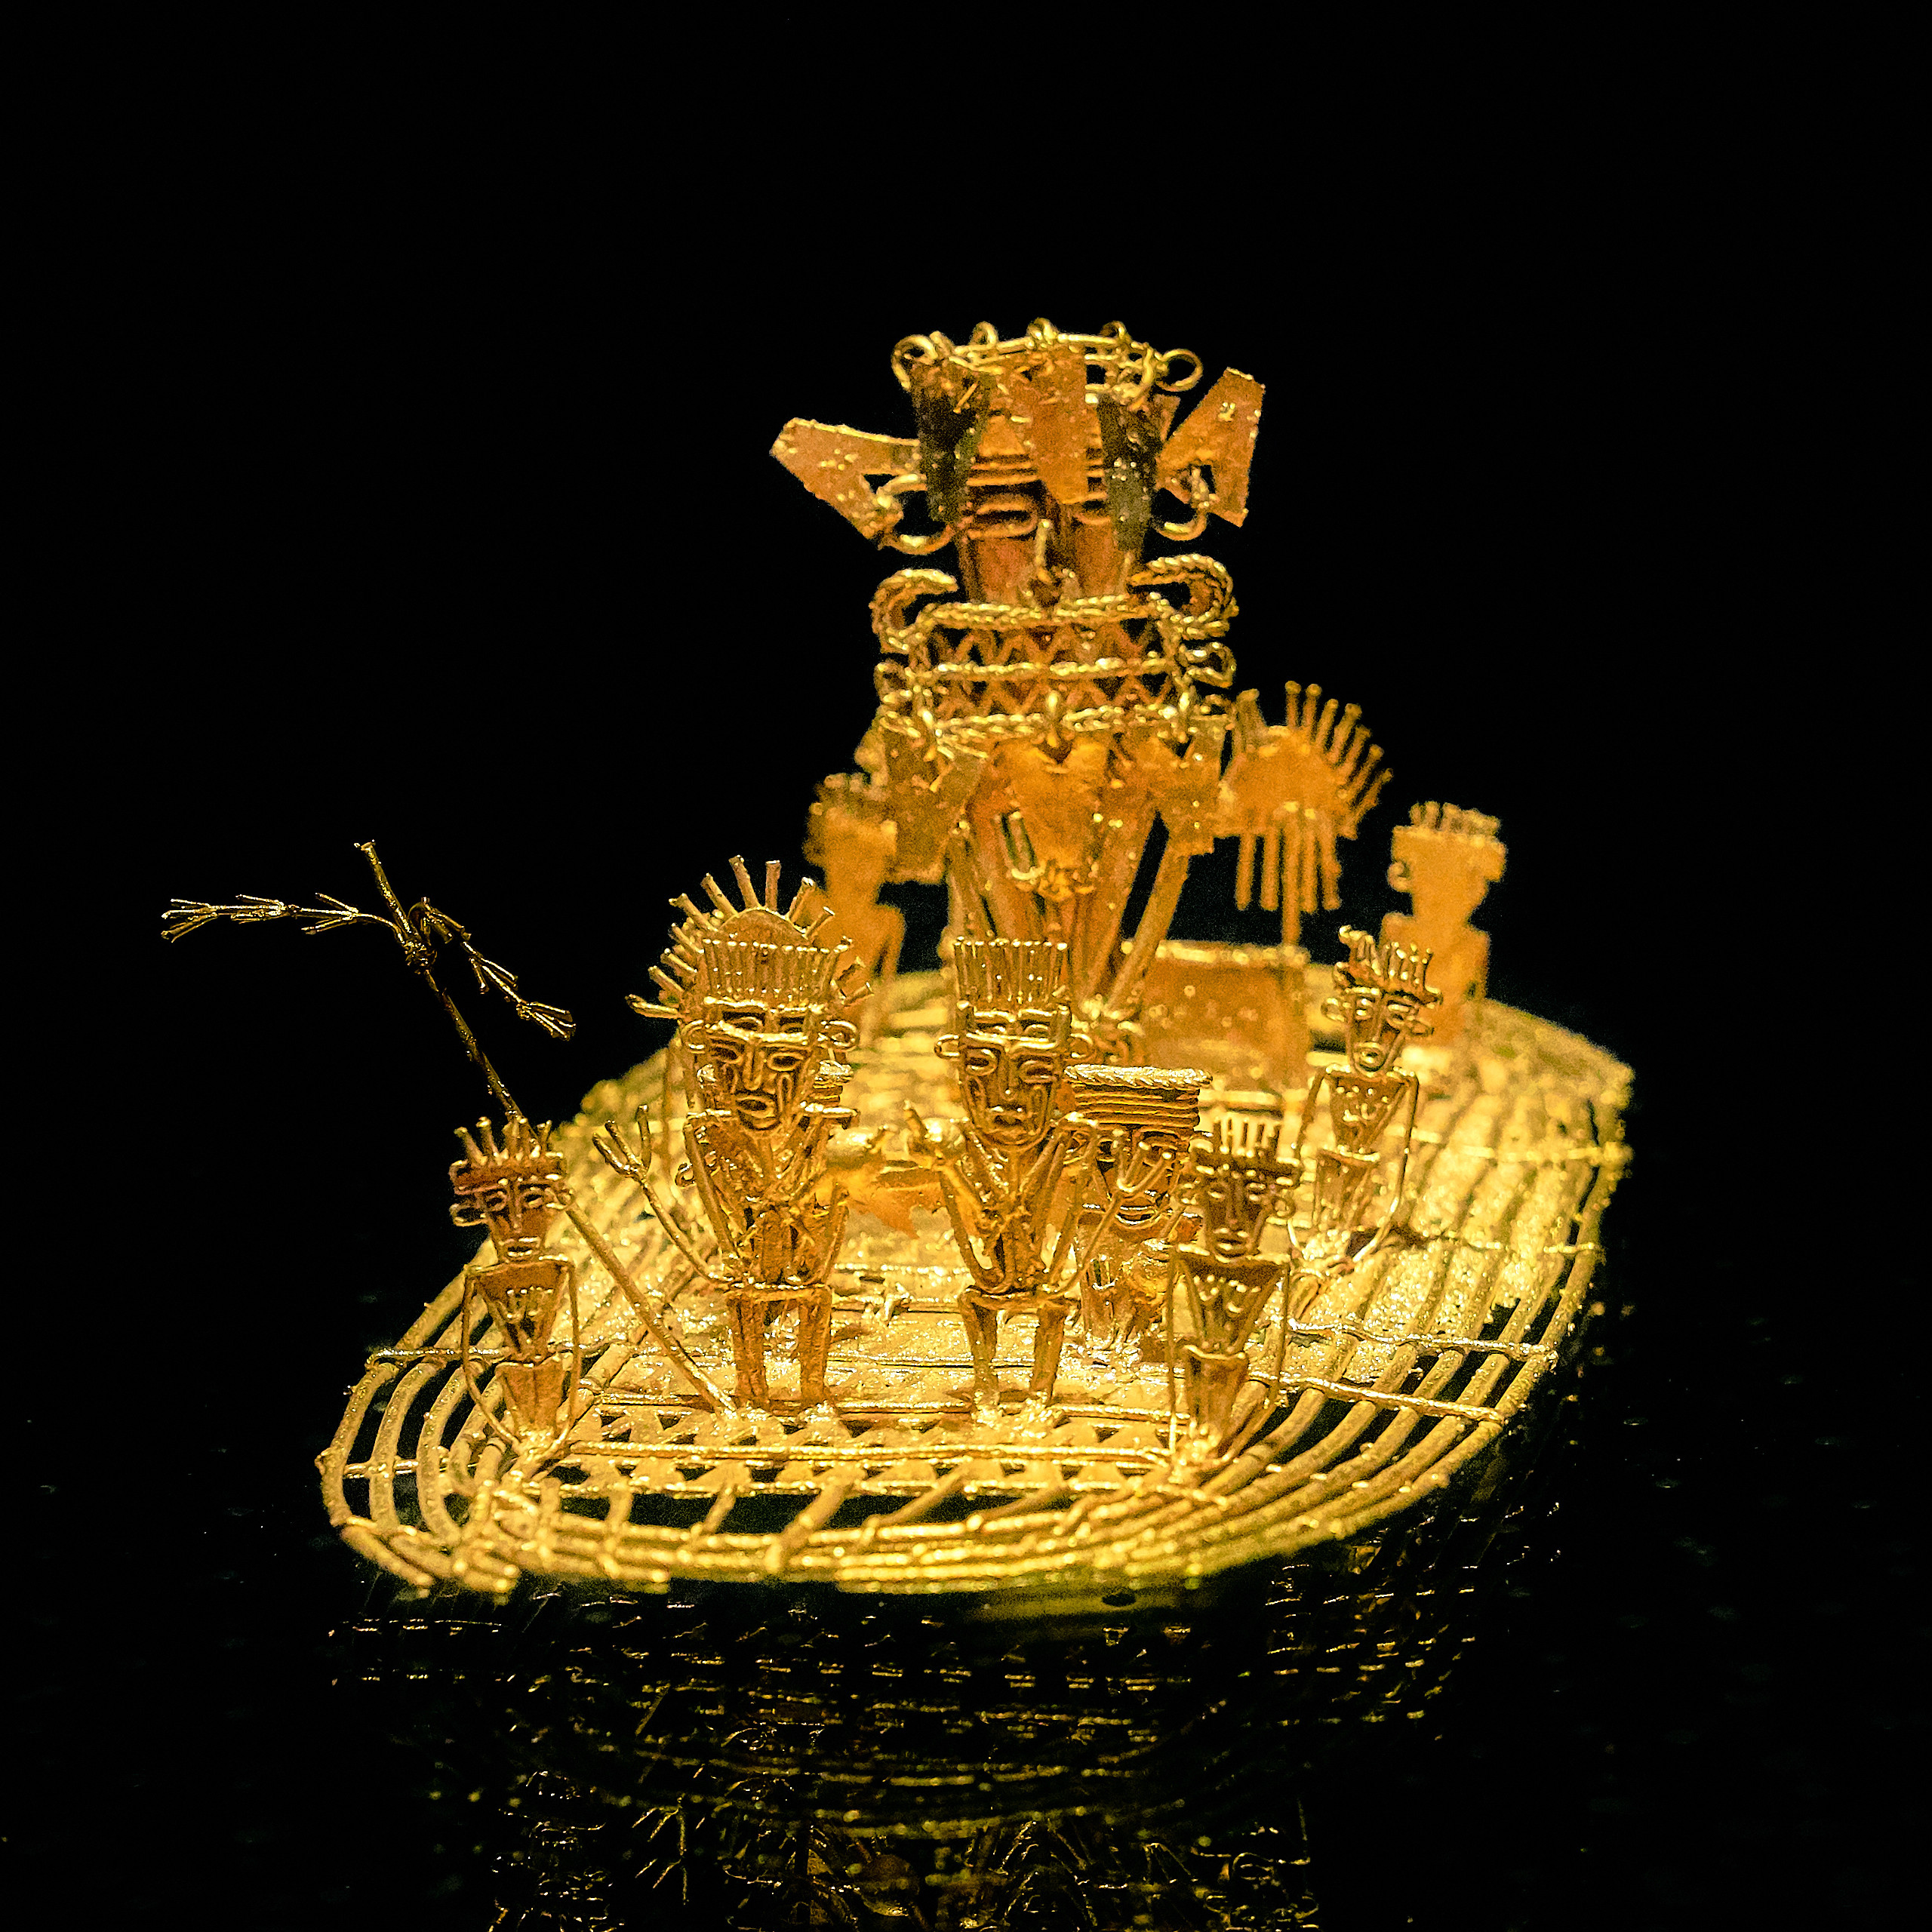 Muisca raft at Museo Del Oro